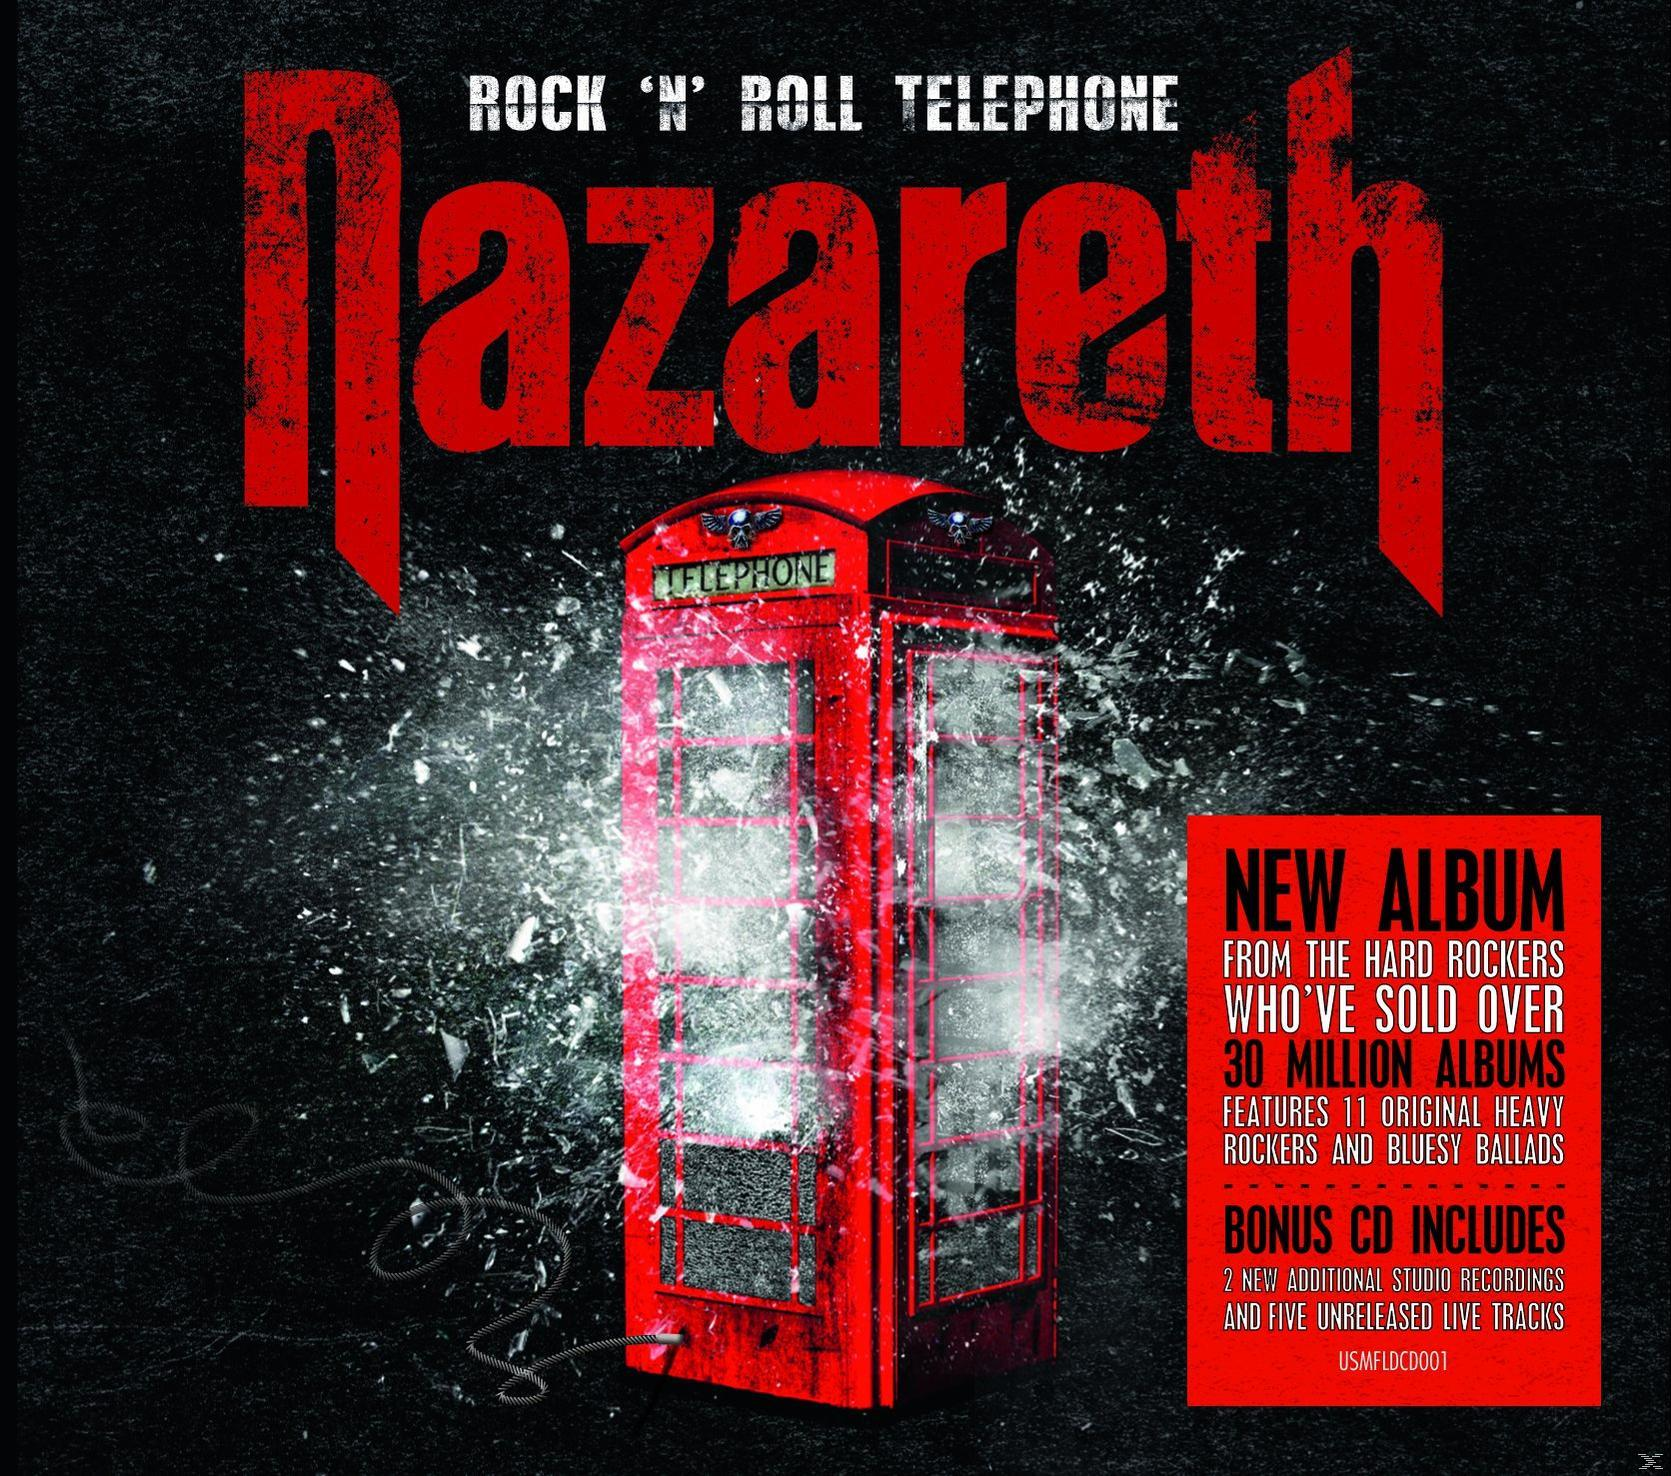 Telephone Deluxe Roll Edition) Nazareth (CD) (2CD Rock\'n - -